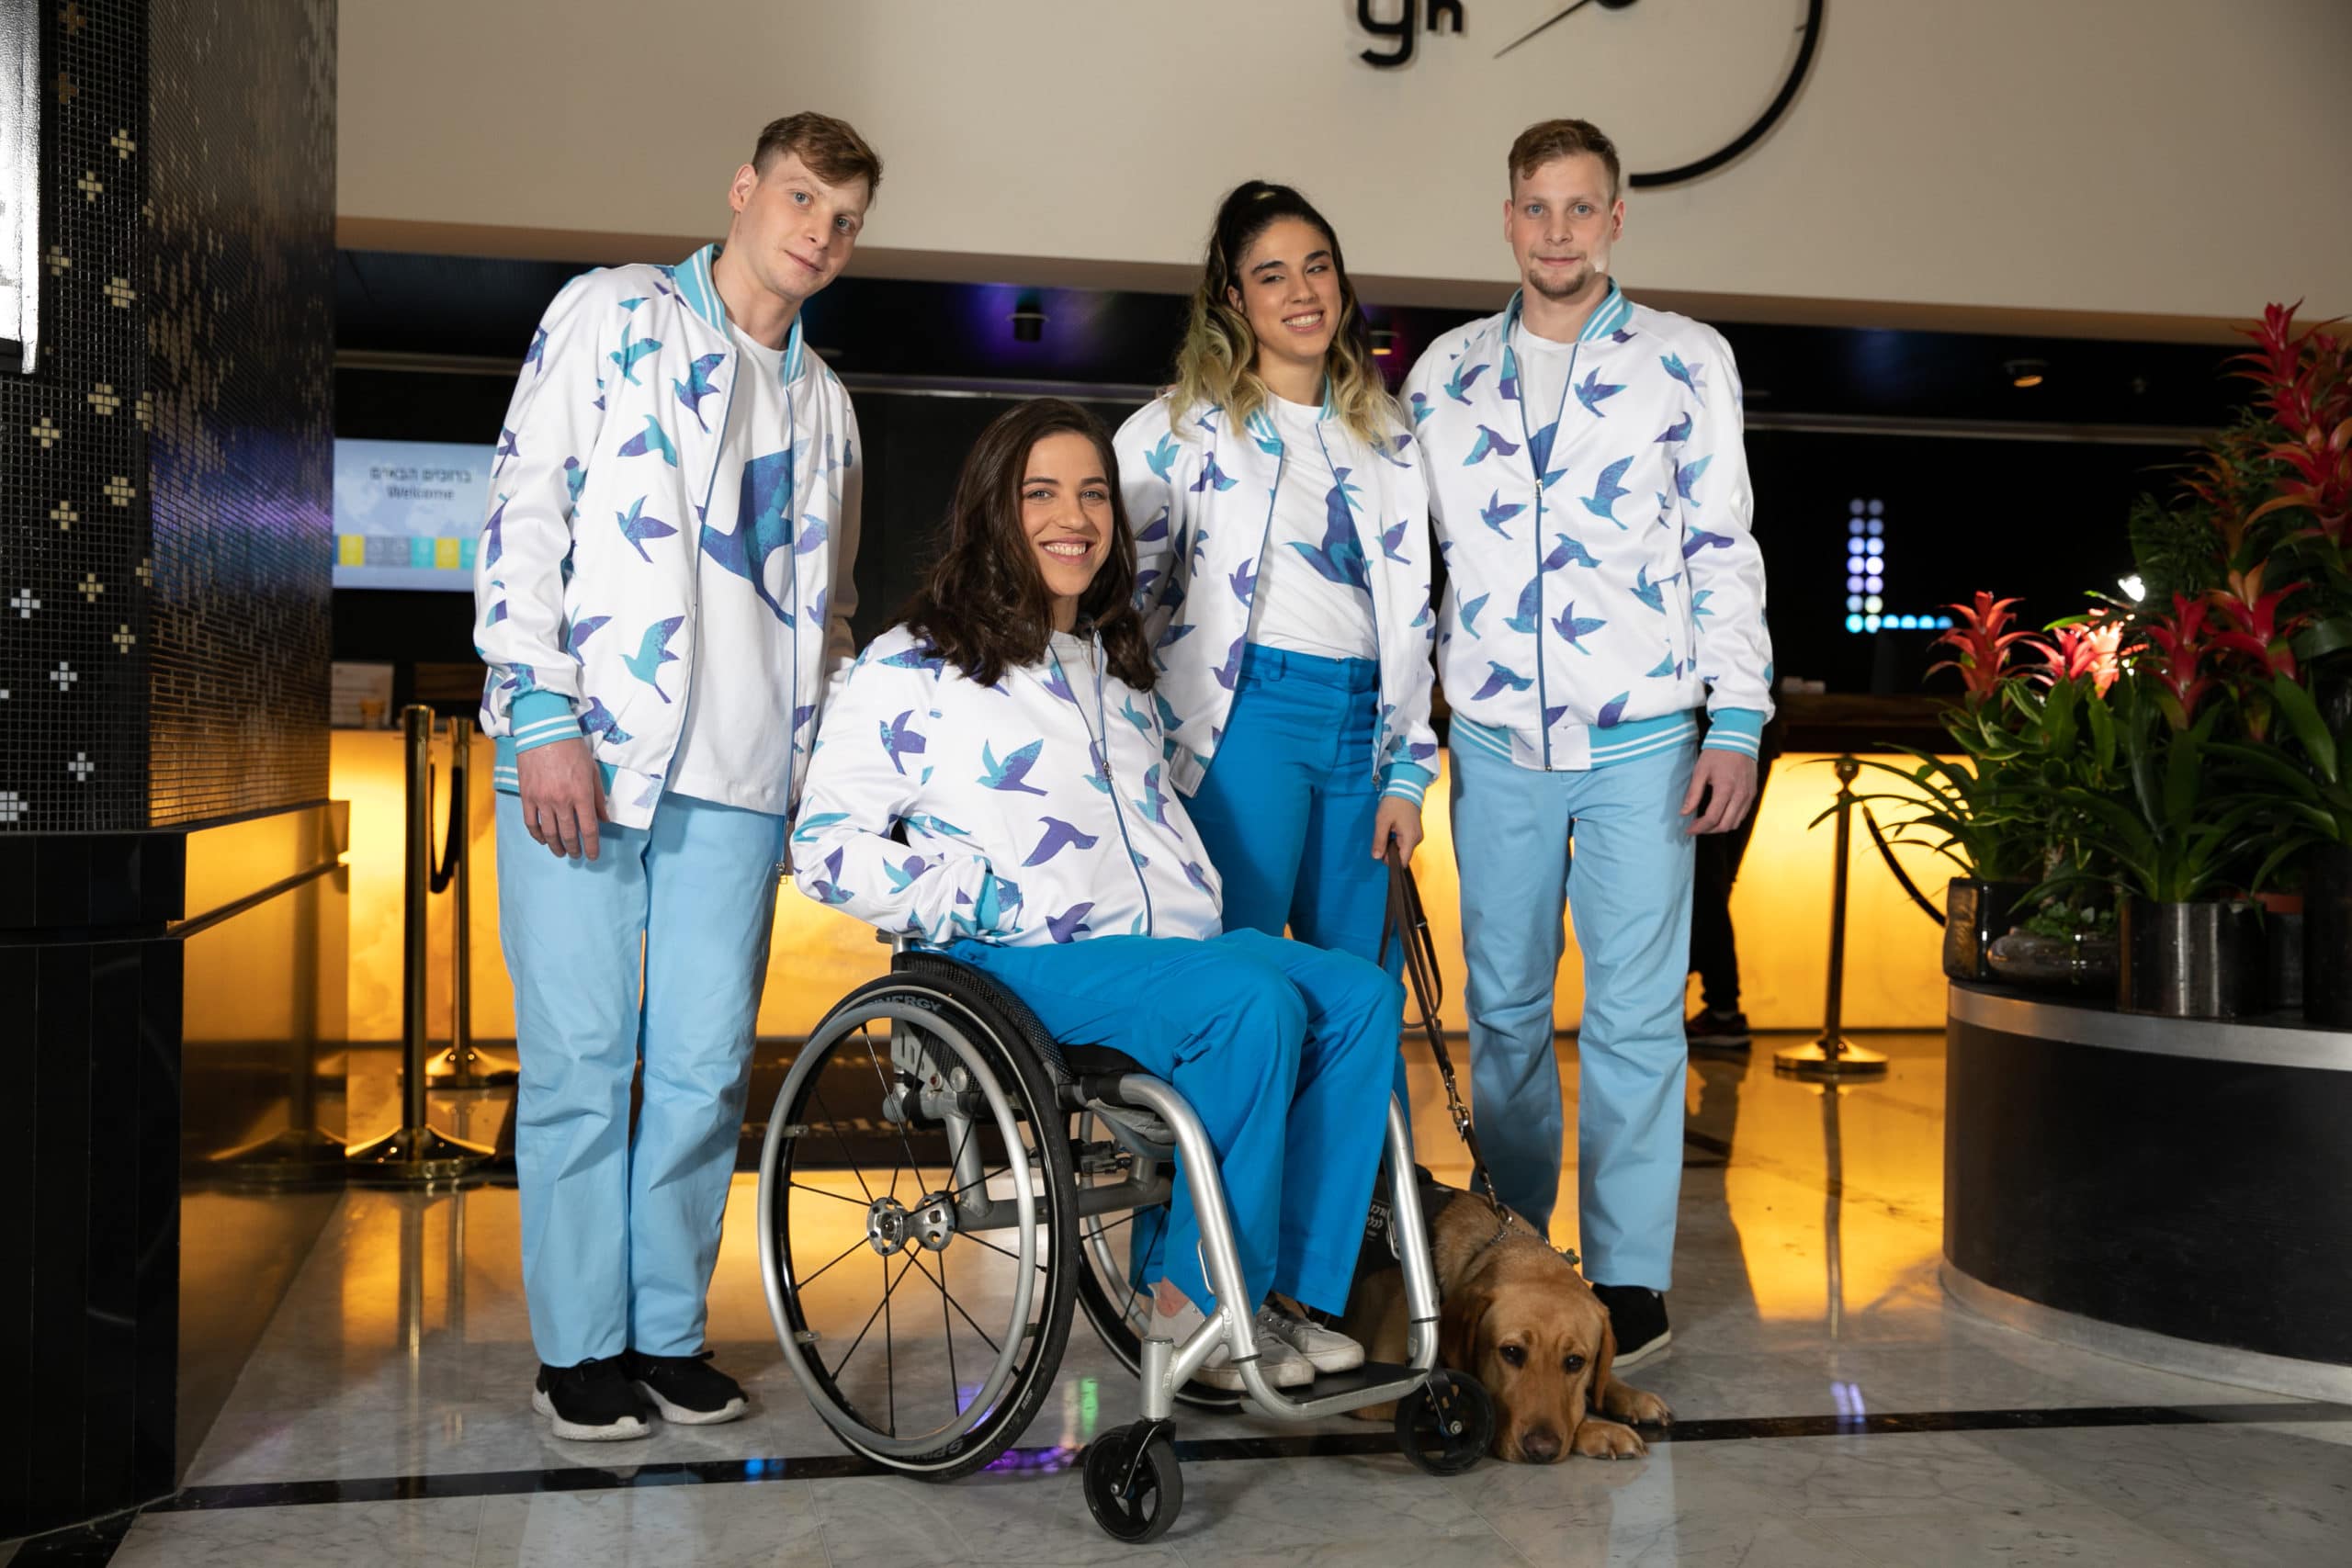 Israeli Paralympic athletes wearing Palta birds white and blue outfit. From left to right- Arik Maliar, Inbal Pezaro, Roni Ohayon and Mark Maliar.